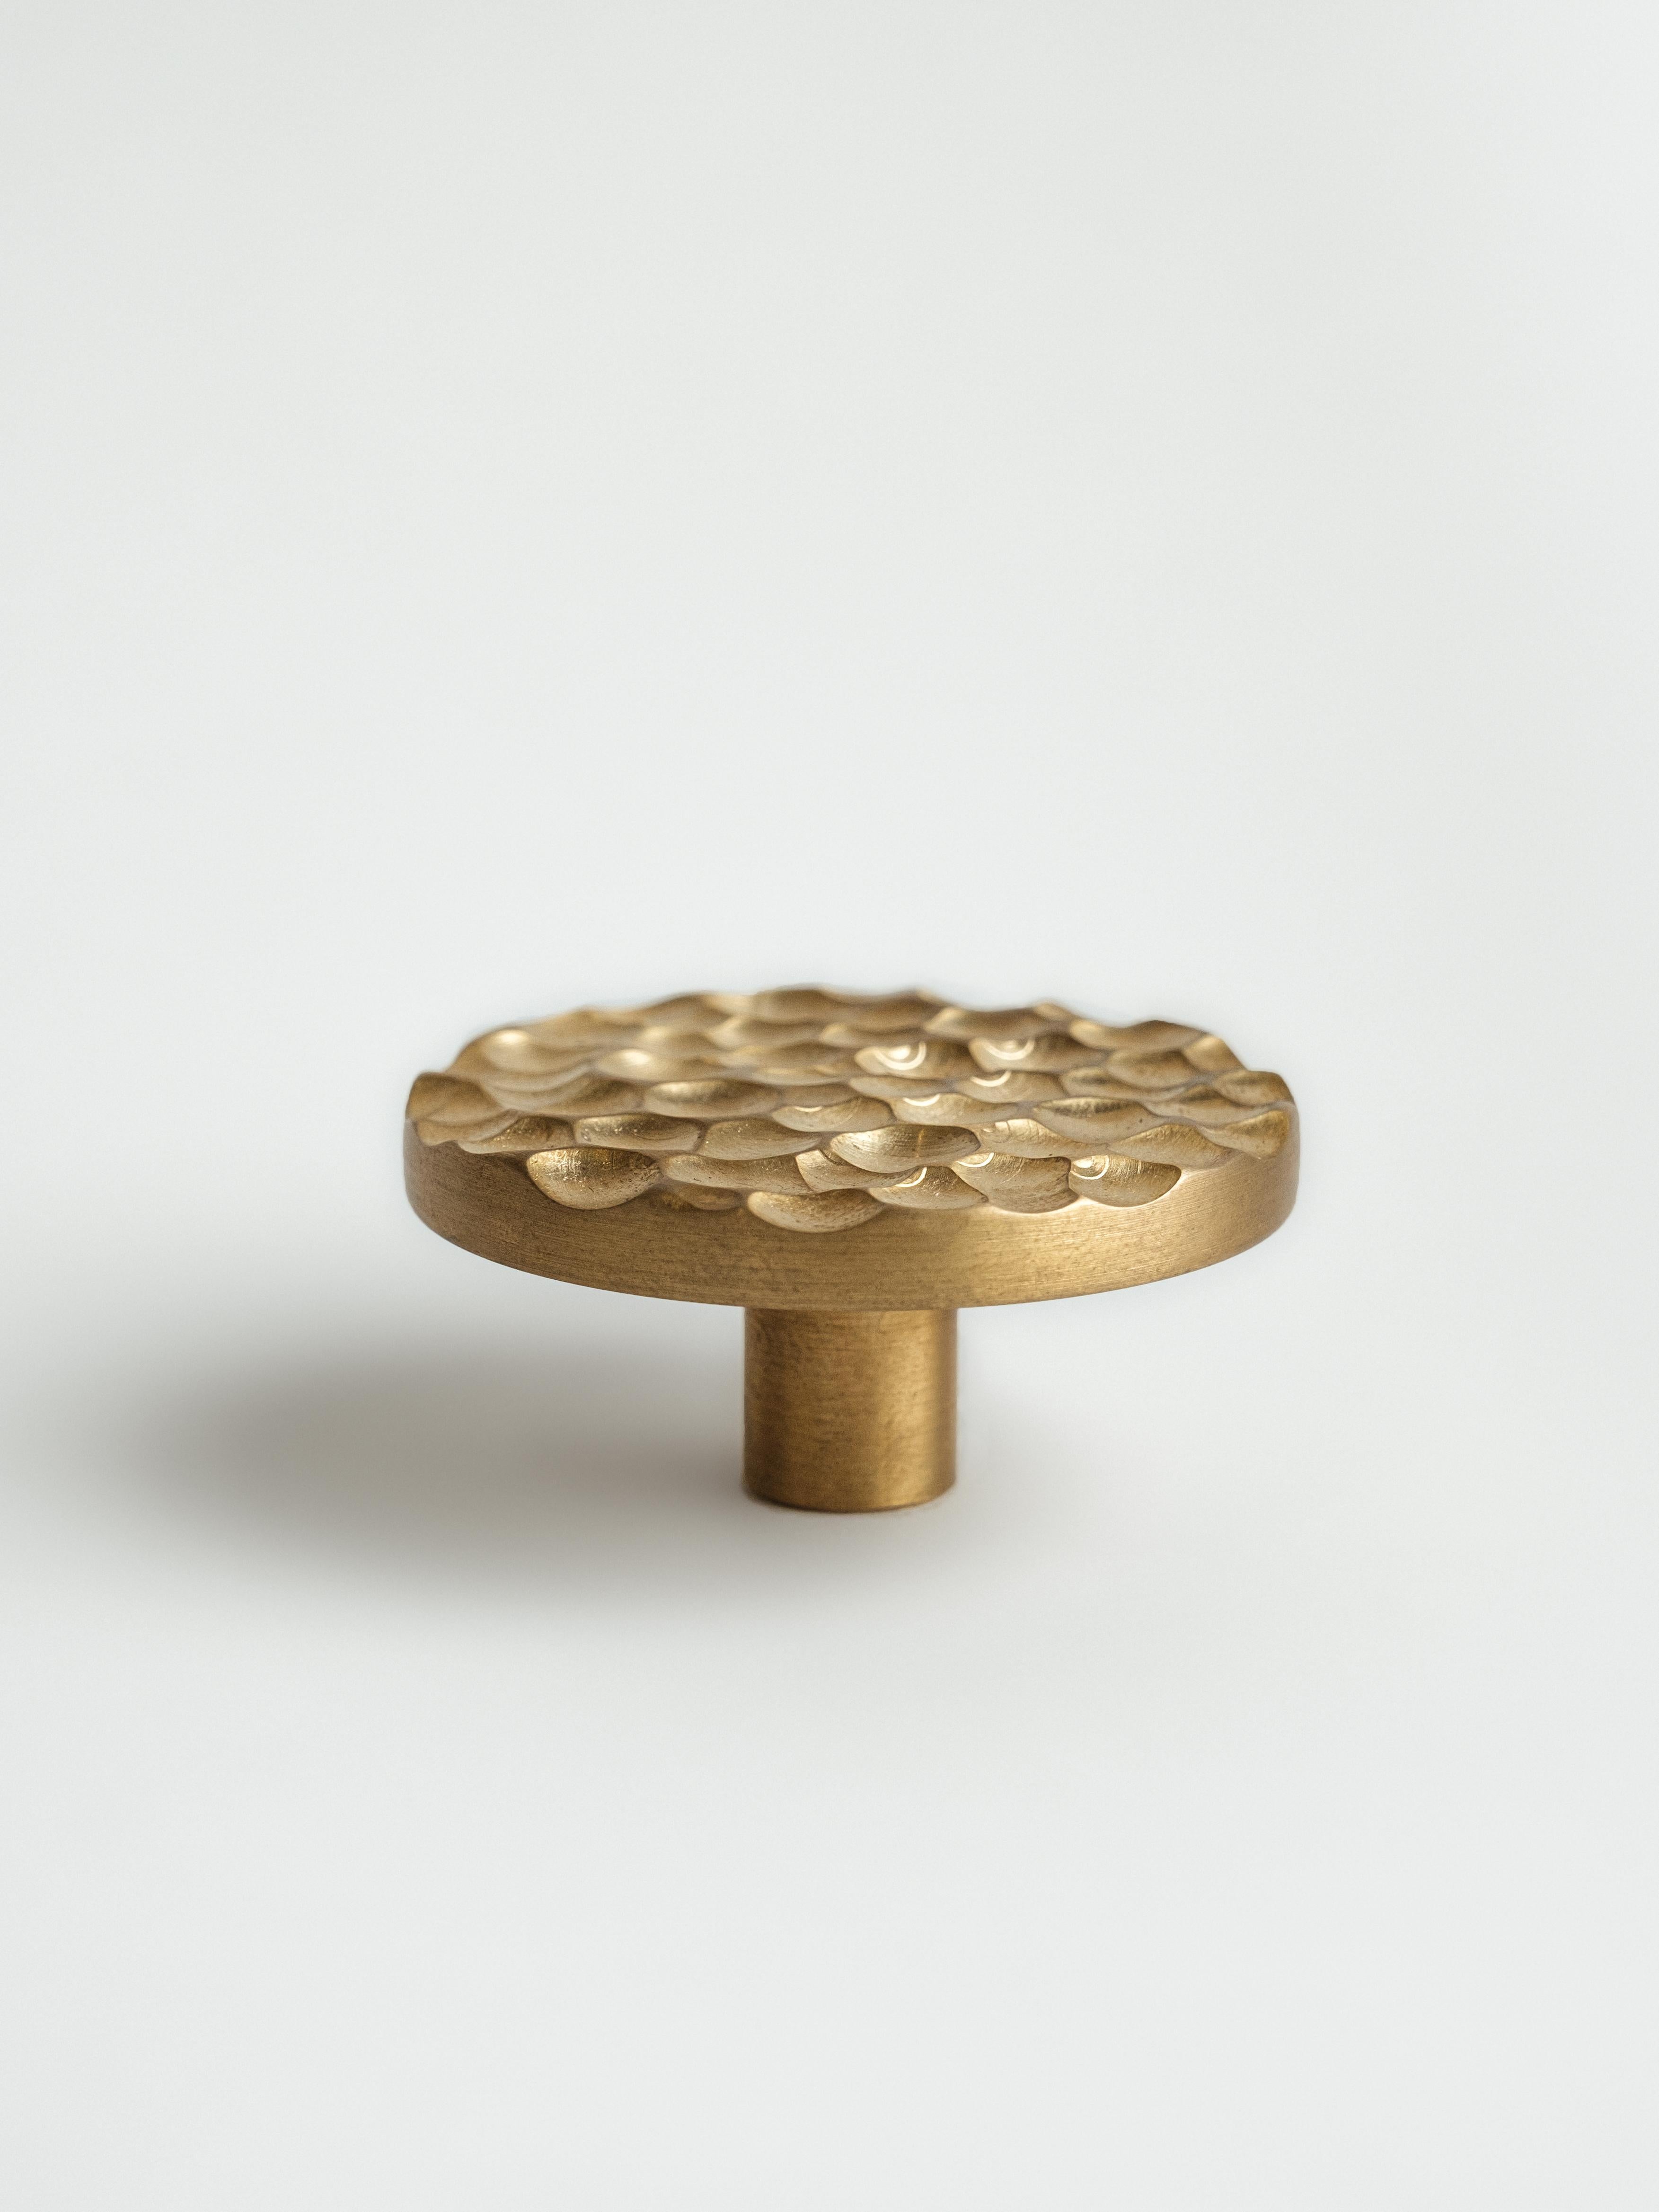 Handcrafted hardware by RUDA Studio is aimed to embody a touch of natural phenomena. The hammered brass handle reminds of honeycombs or drops of water frozen in the metal. This aesthetic and timeless detail will become a jewel for the